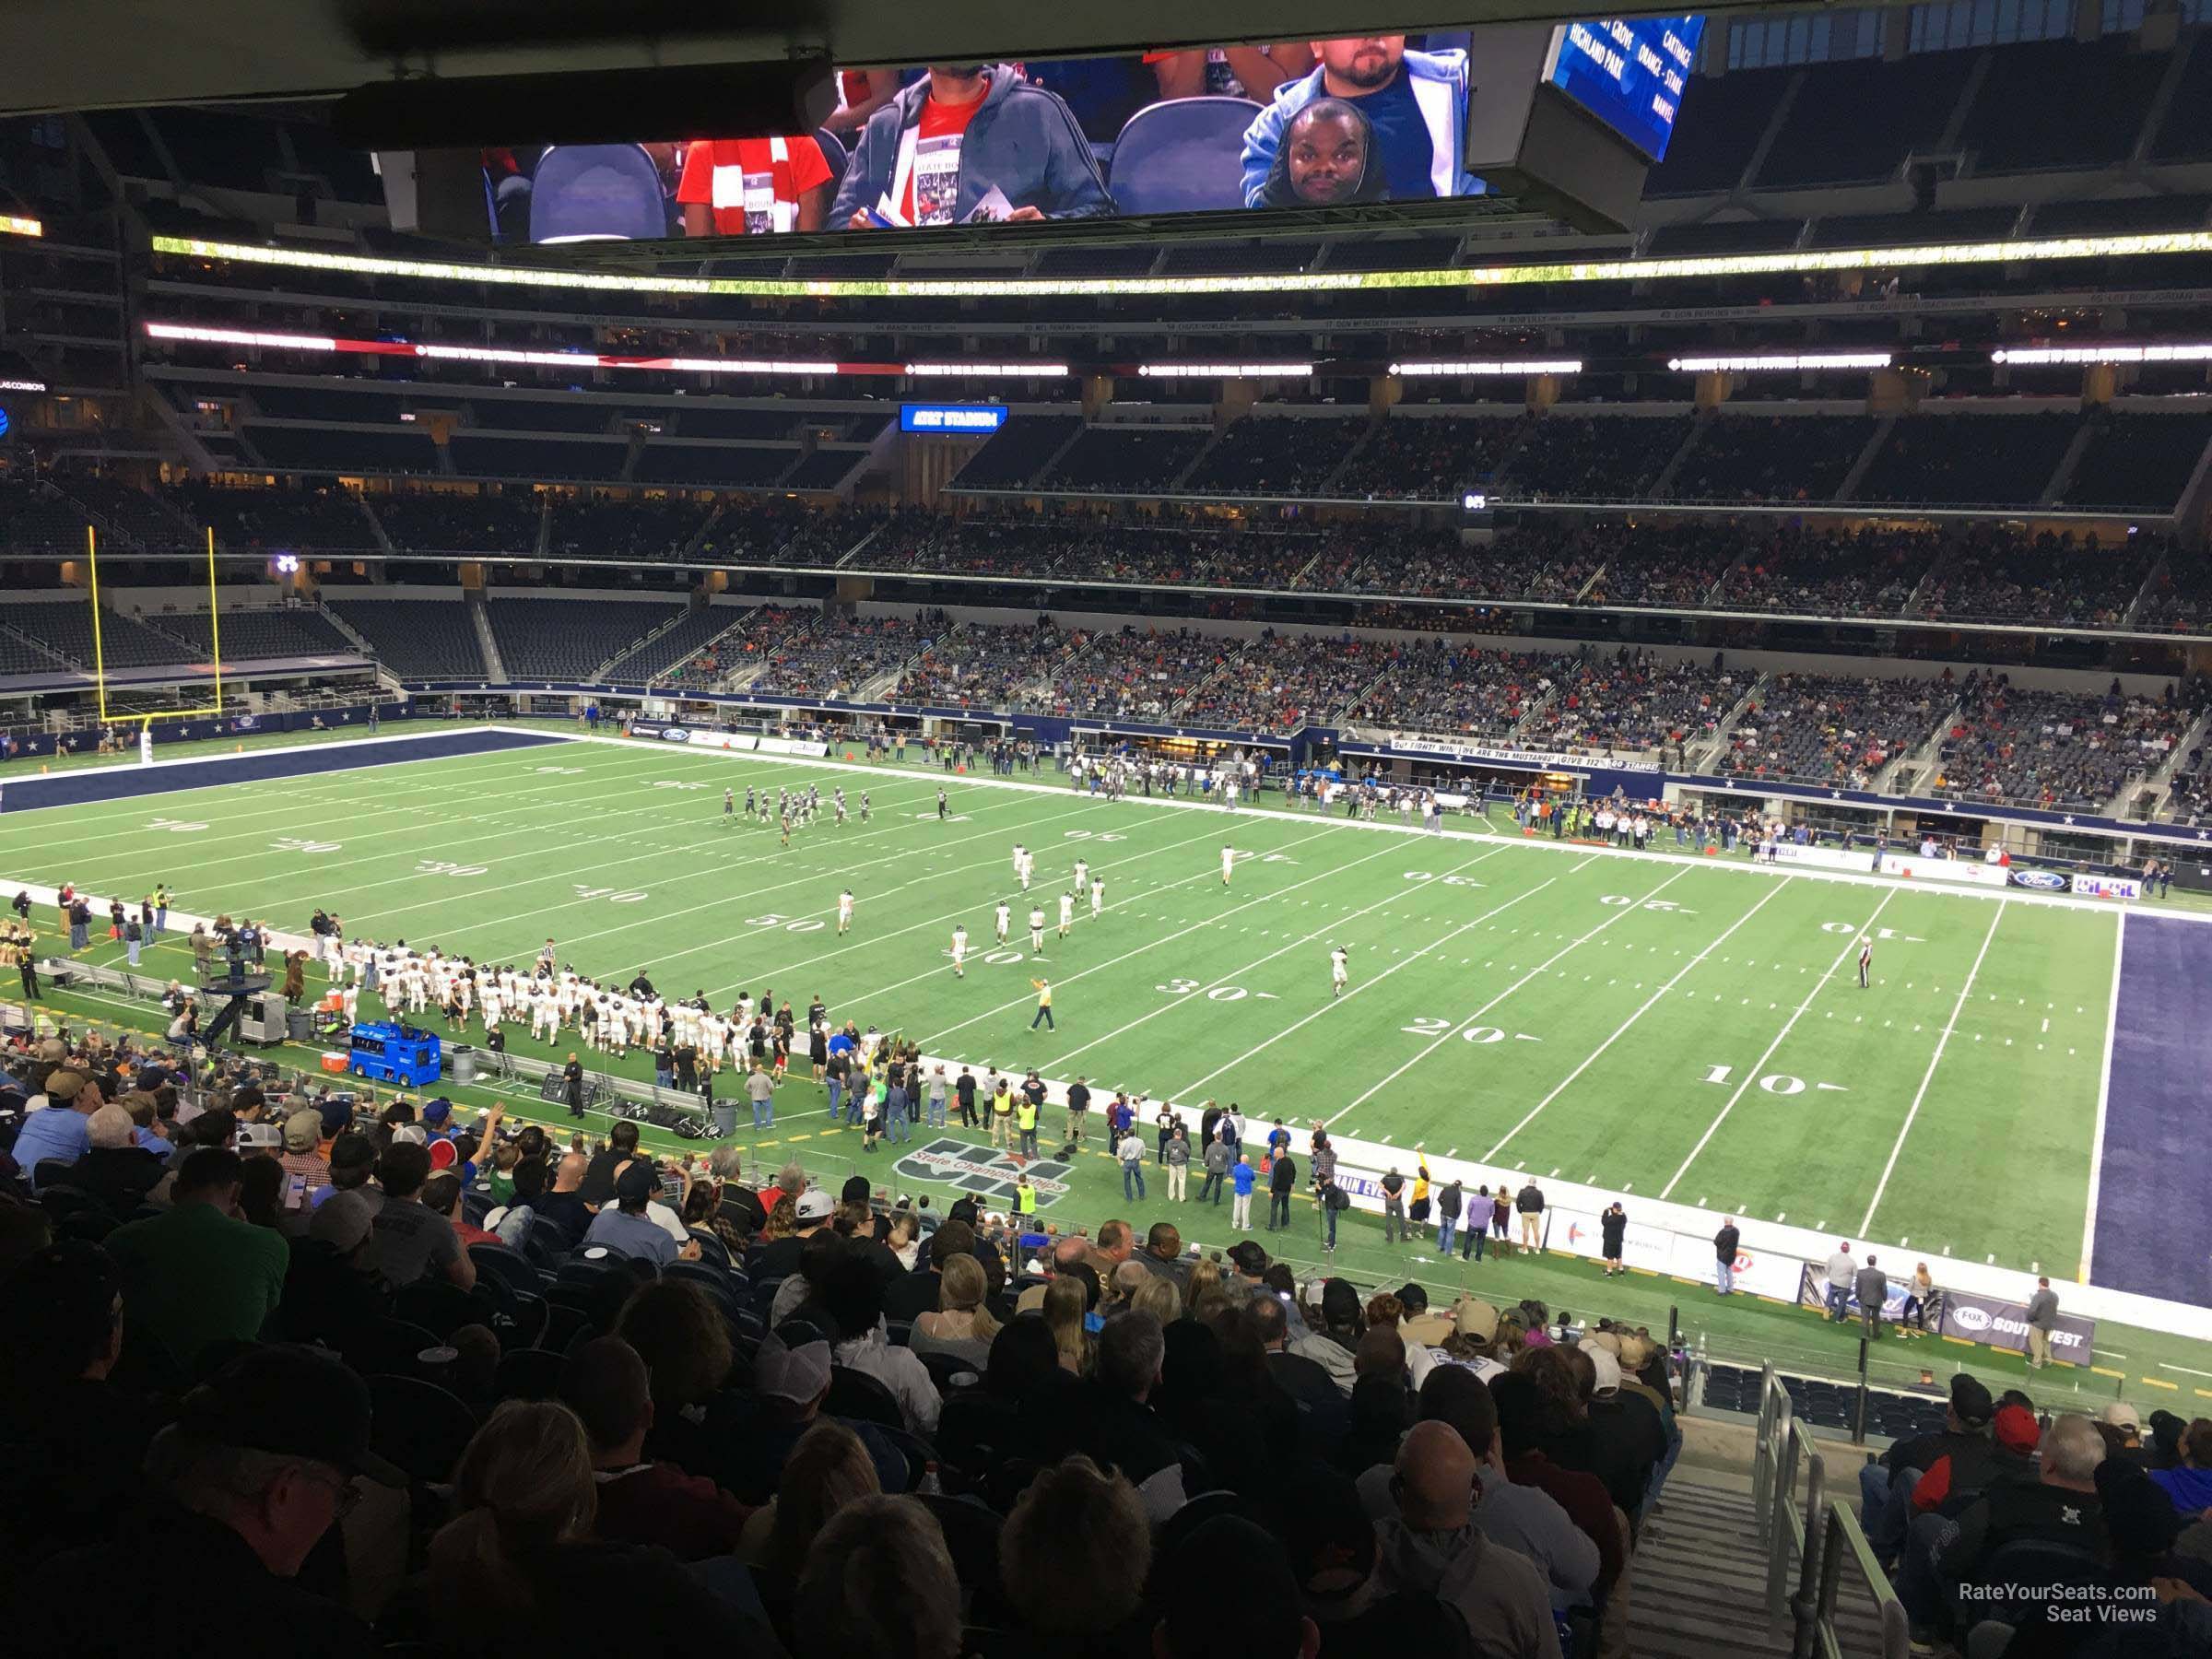 section c231, row 14 seat view  for football - at&t stadium (cowboys stadium)